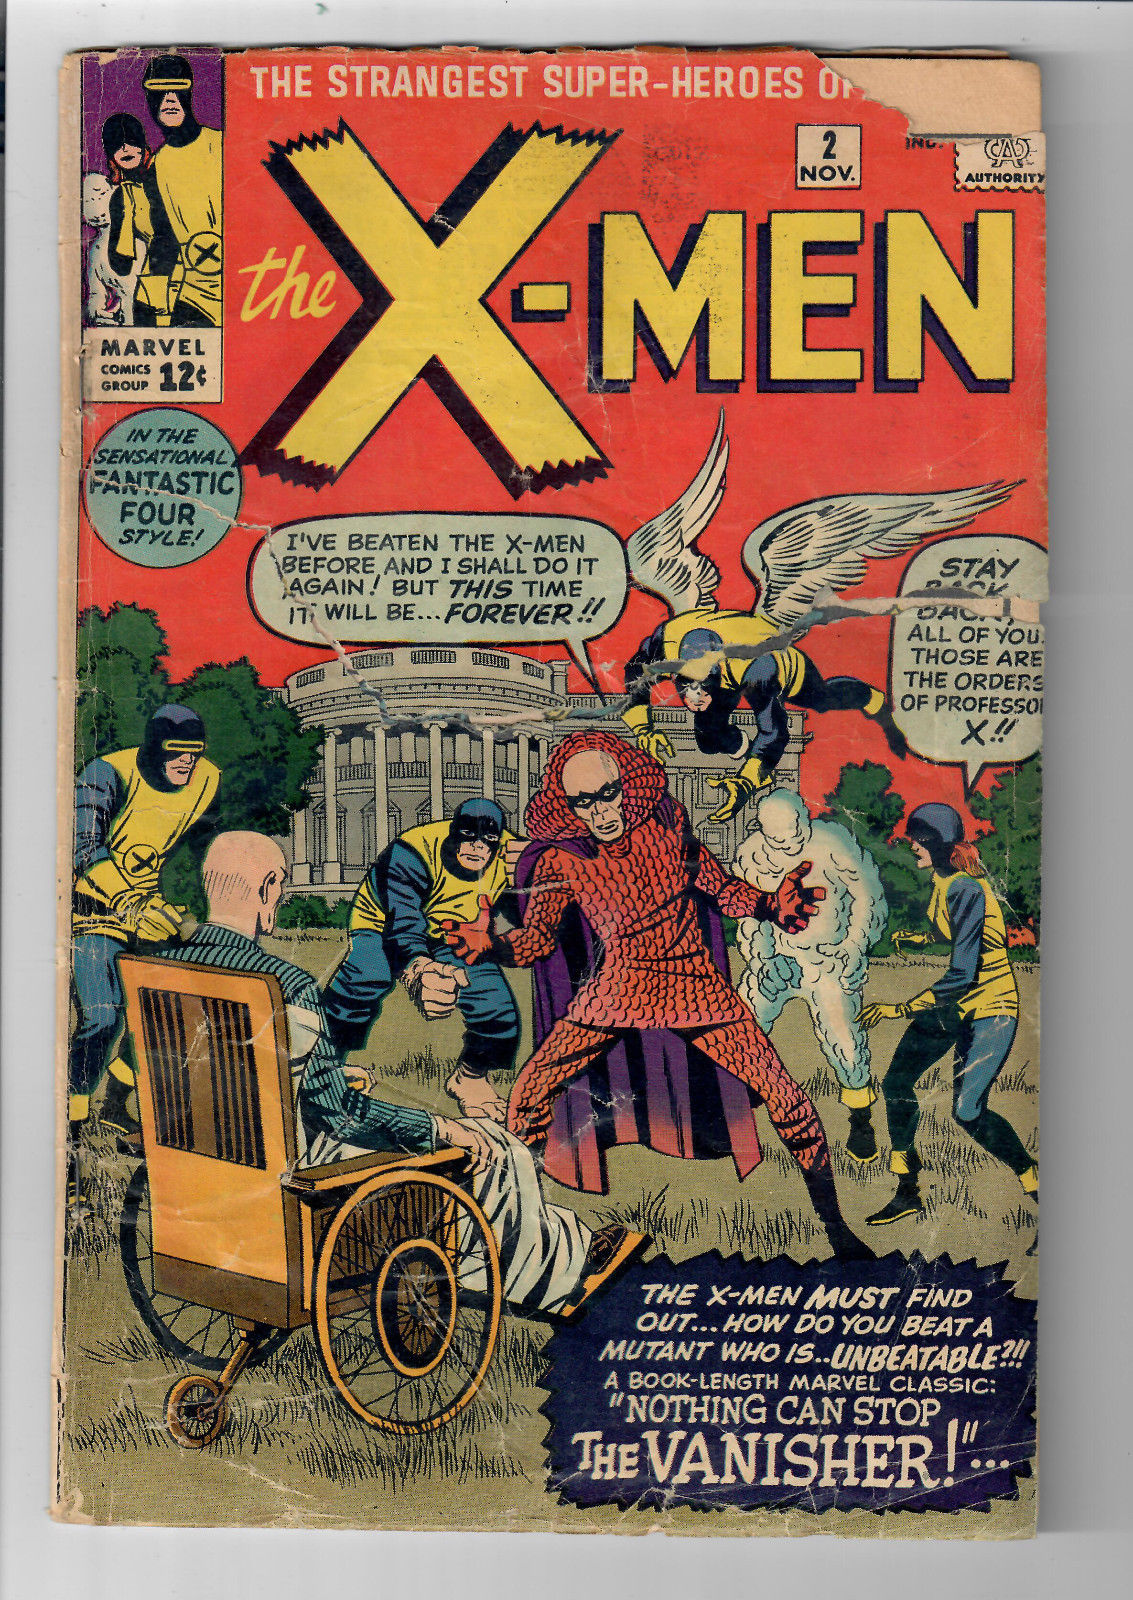 X-MEN #2 (UNCANNY) - Grade 2.0 - First Appearance of The Vanisher!